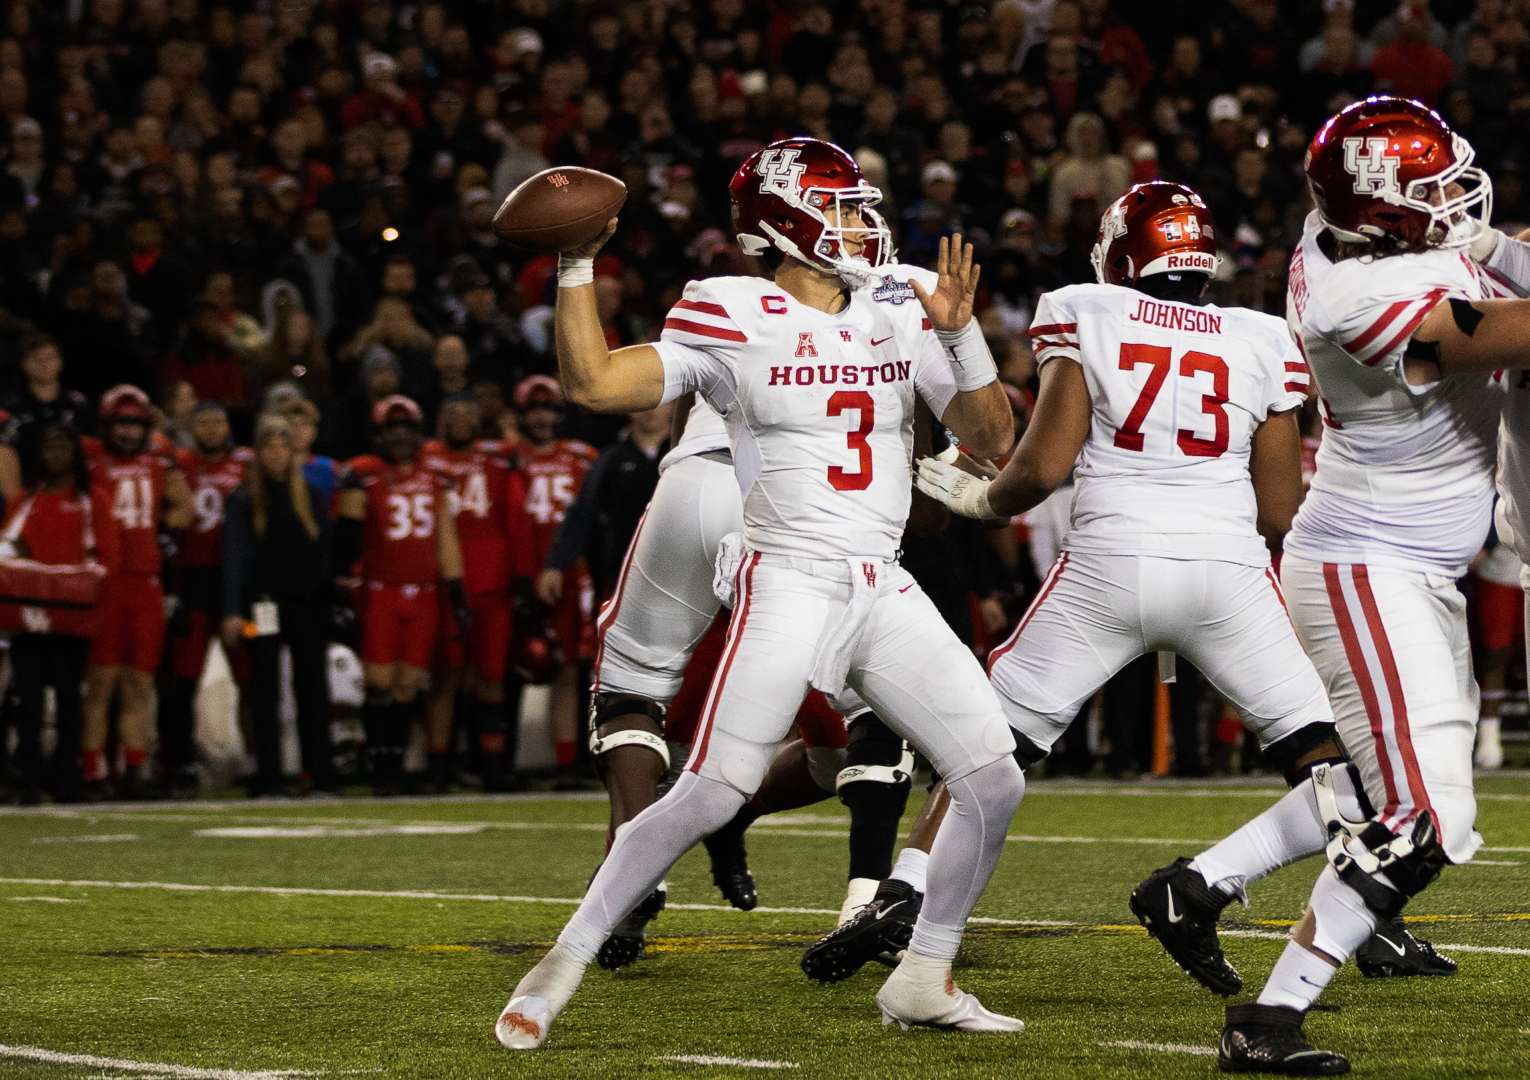 Senior quarterback Clayton Tune and the UH football program have high expectations 2022, including winning the AAC and New Year’s Six bowl. | Sean Thomas/The Cougar